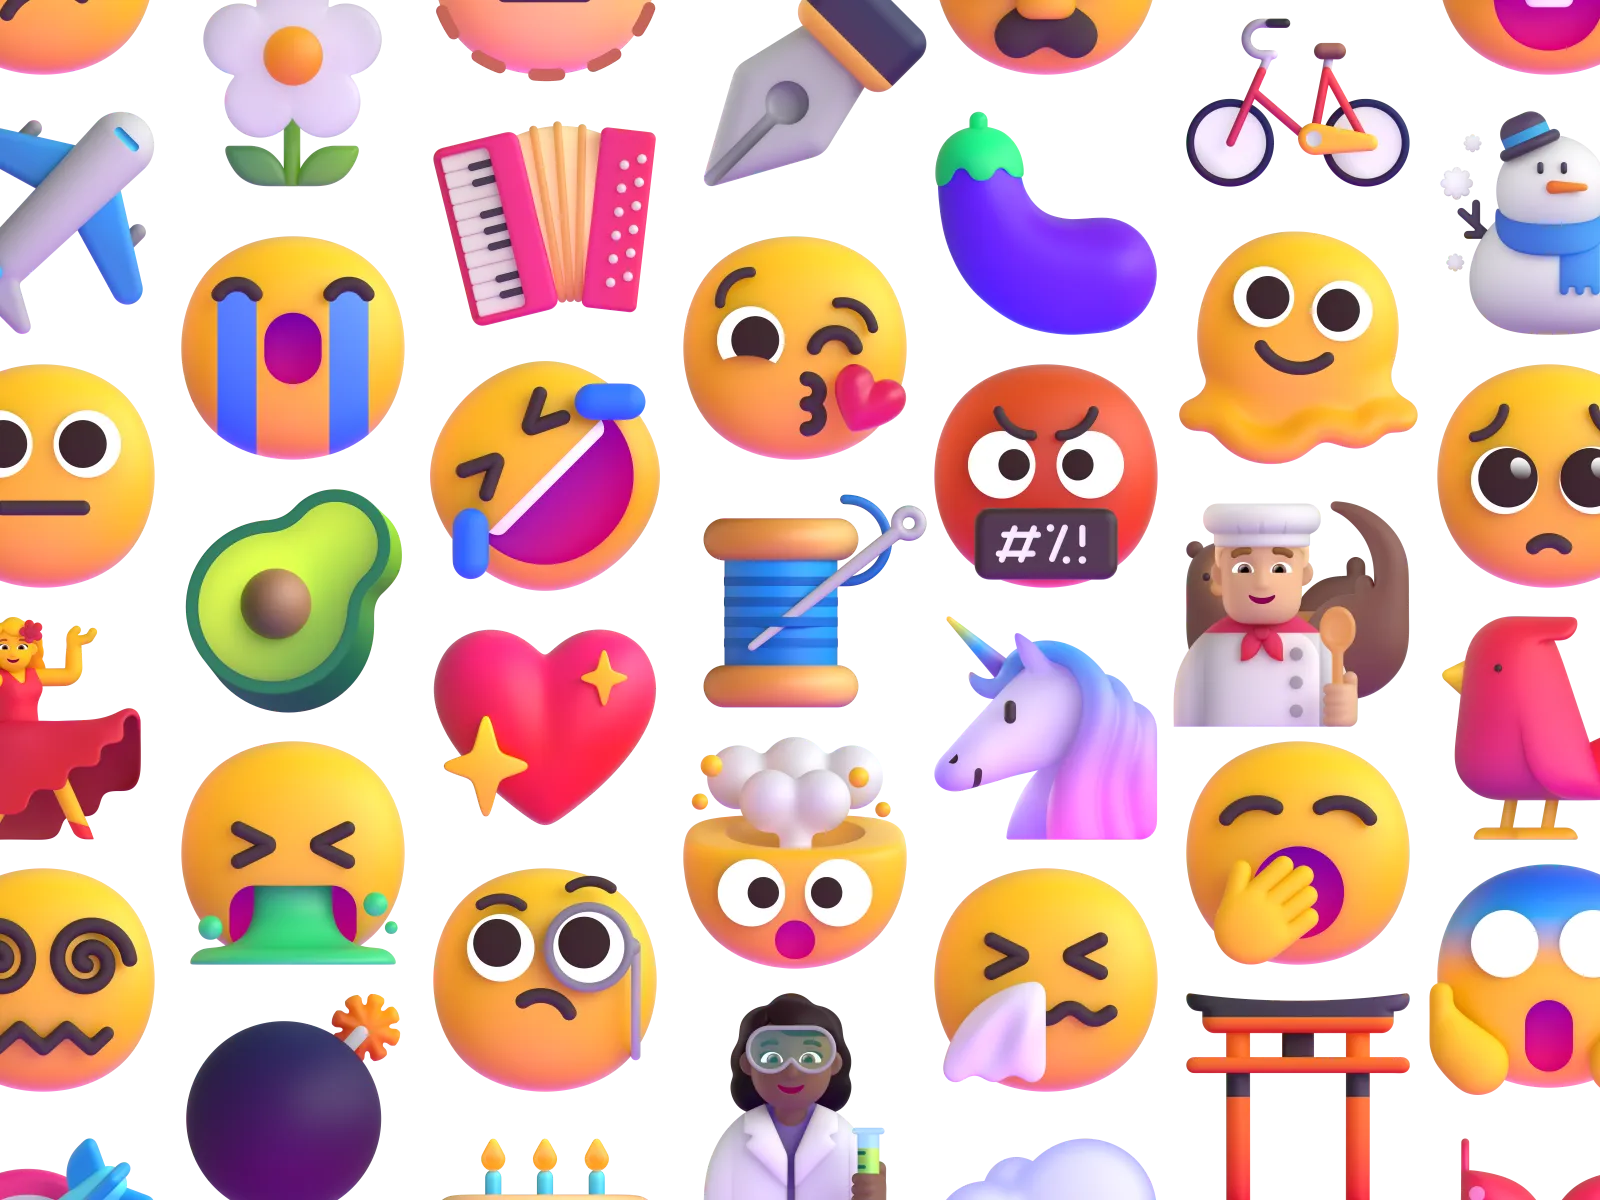 A variety of emoji (a few dozen in total) including faces, objects, food, and animals.